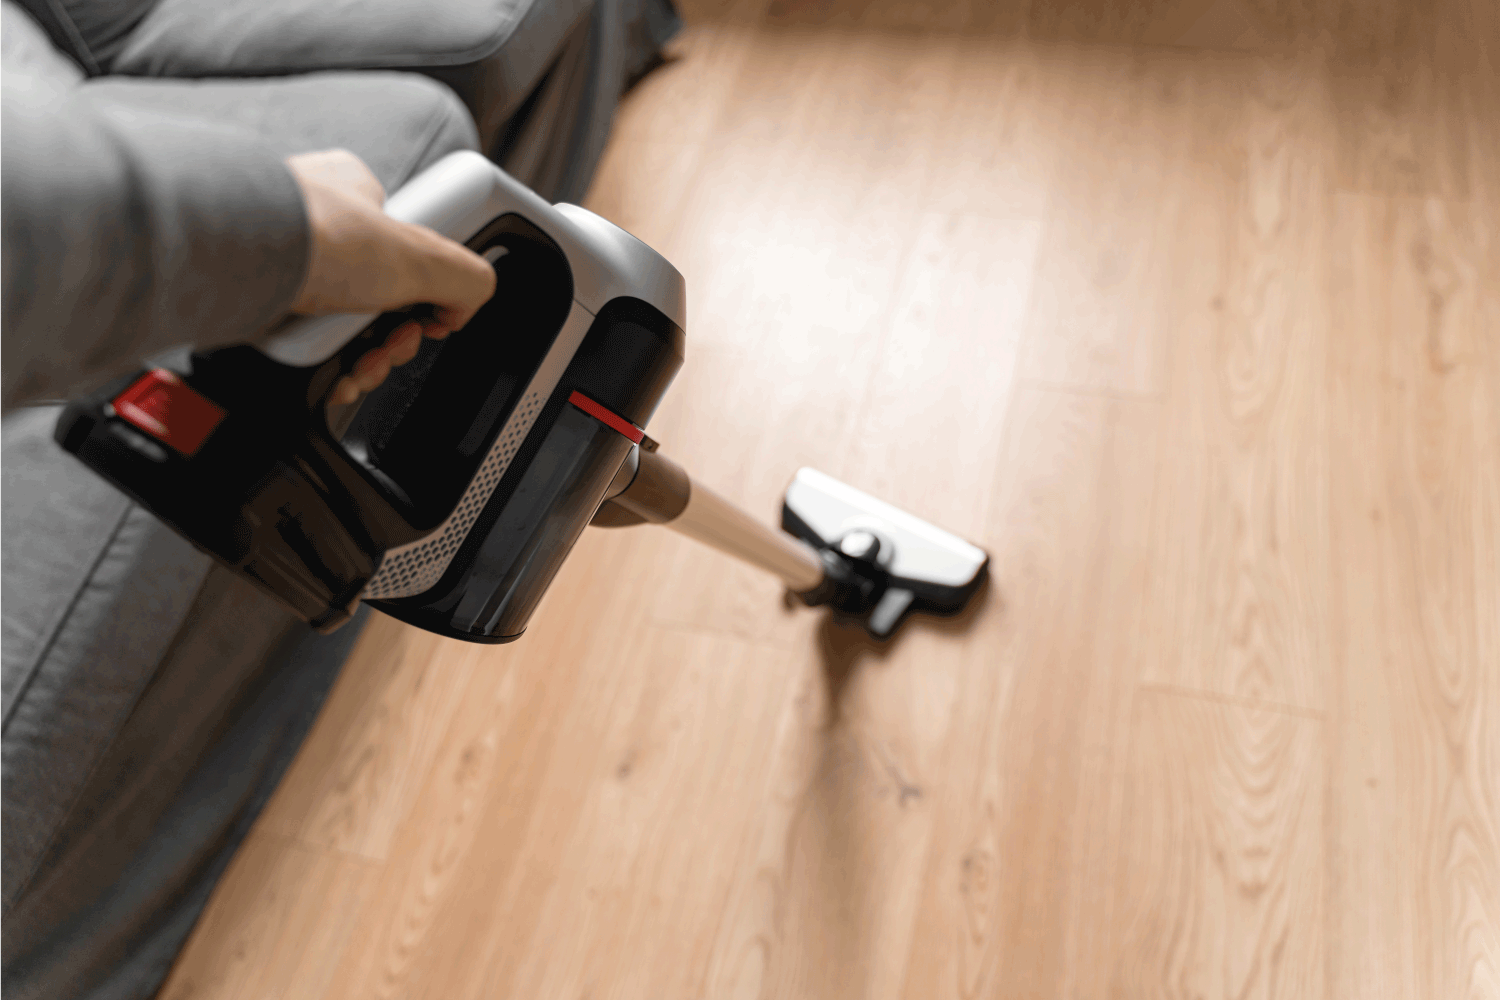 Cleaning wooden floor with wireless vacuum cleaner. Handheld cordless cleaner